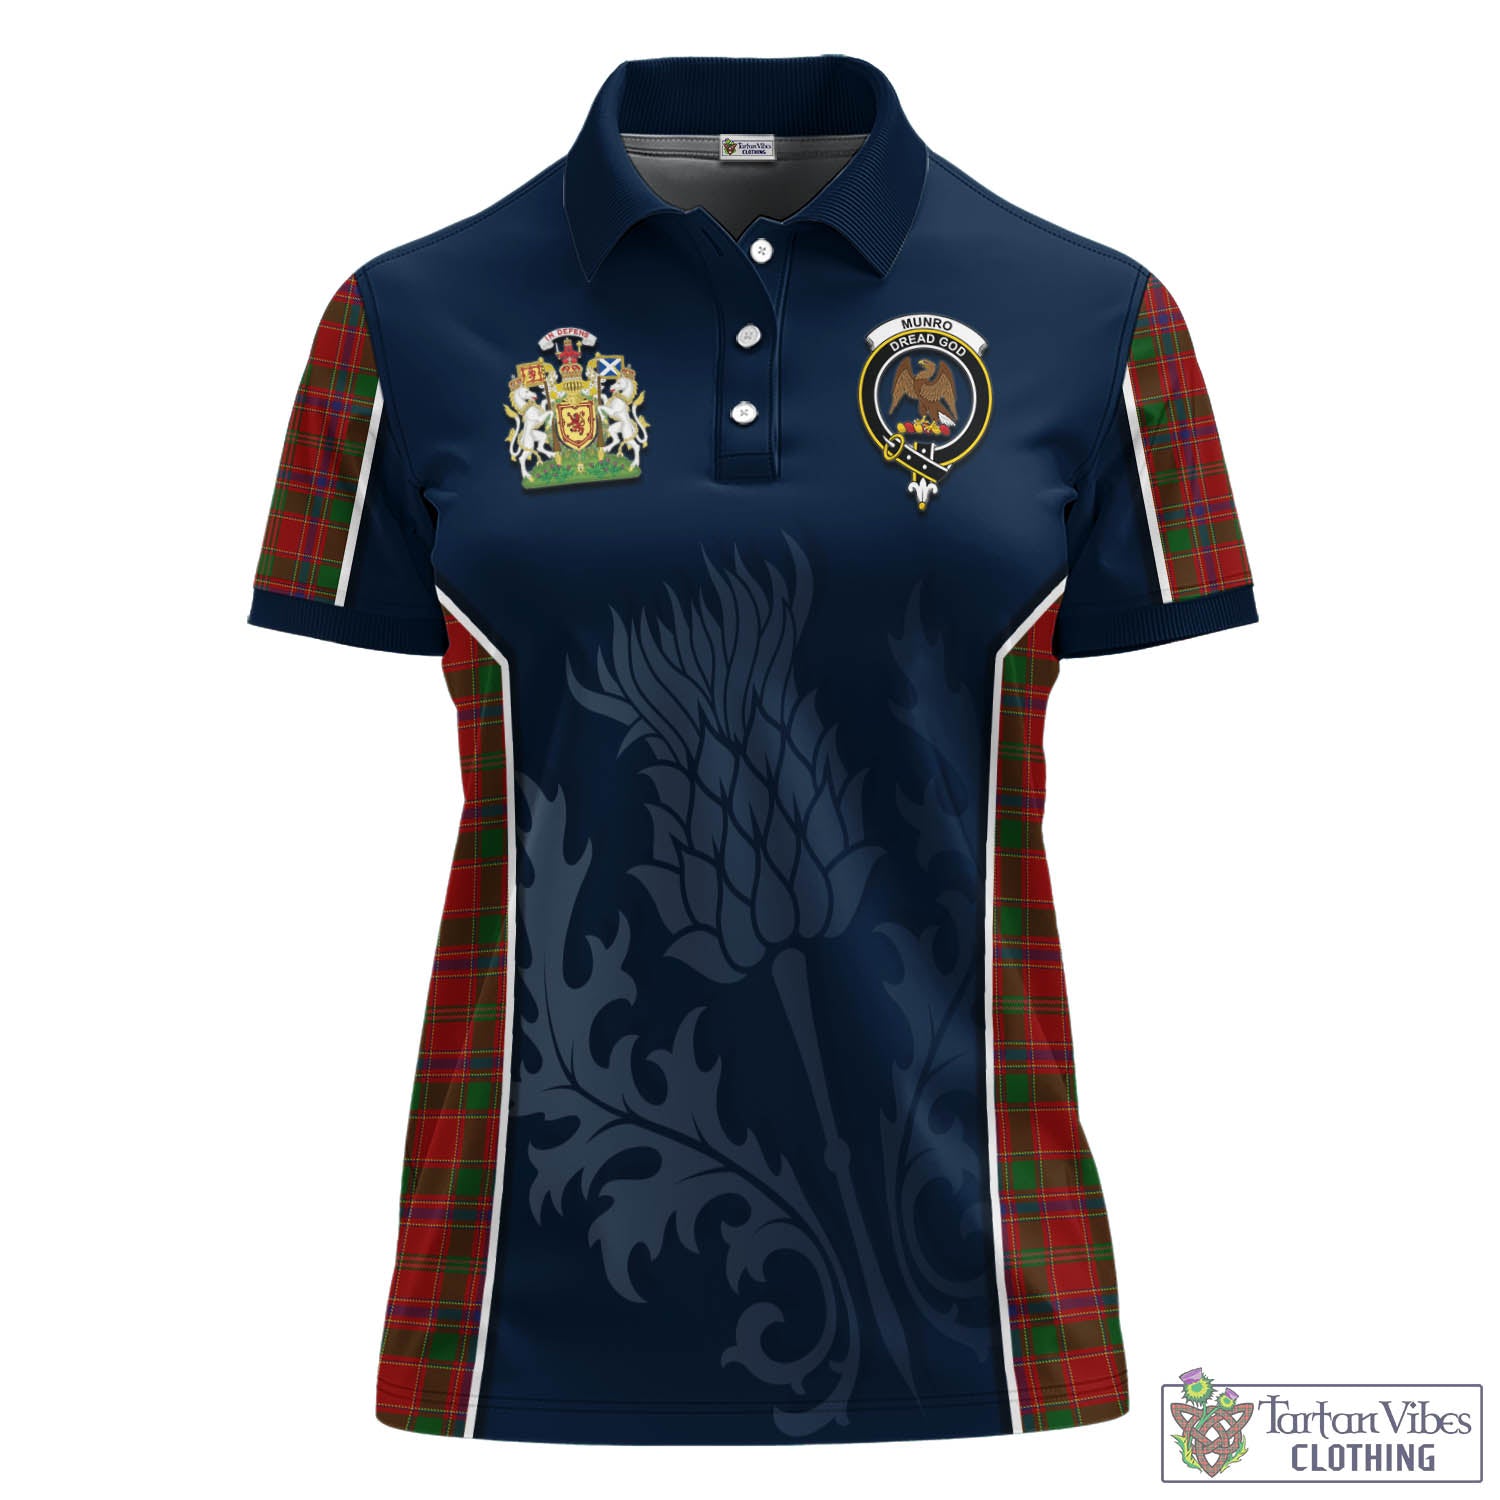 Tartan Vibes Clothing Munro Tartan Women's Polo Shirt with Family Crest and Scottish Thistle Vibes Sport Style